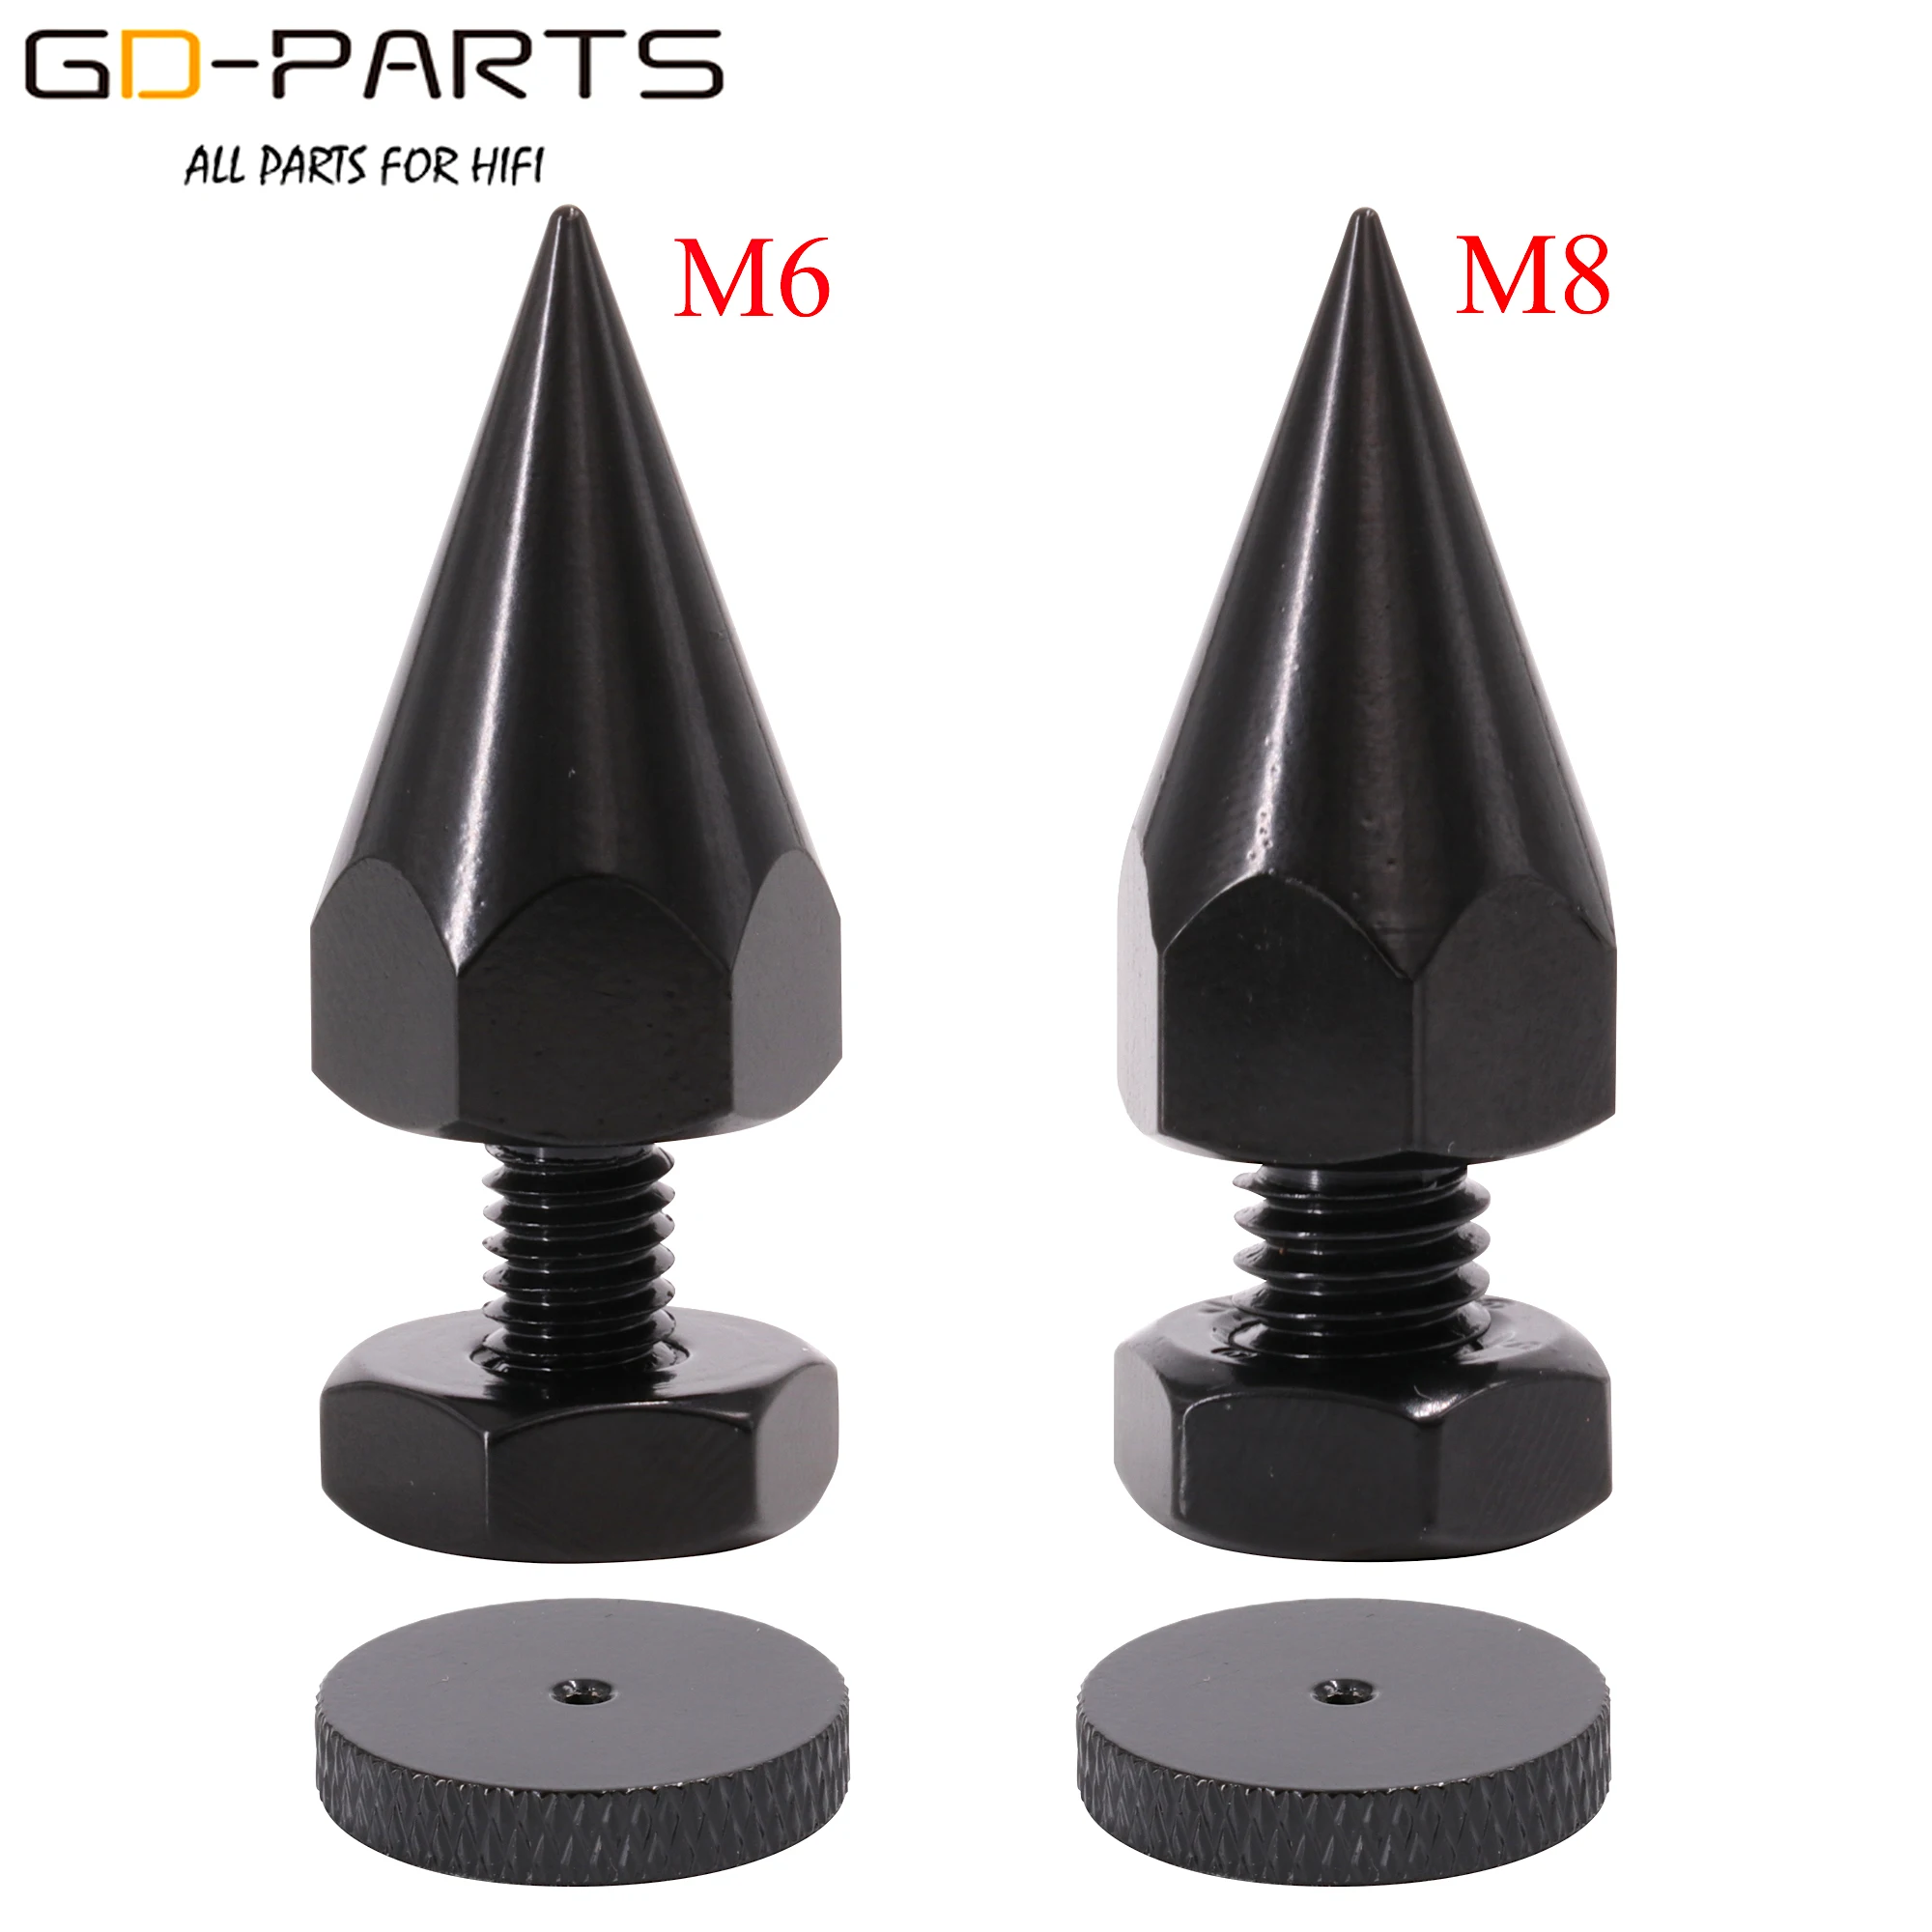 

M6 M8 Thread Iron Speaker Spike Cone Damper AMP Turntable Recorder Studio Monitor Isolation Stand Vibration Cone Foot Pad 40mm